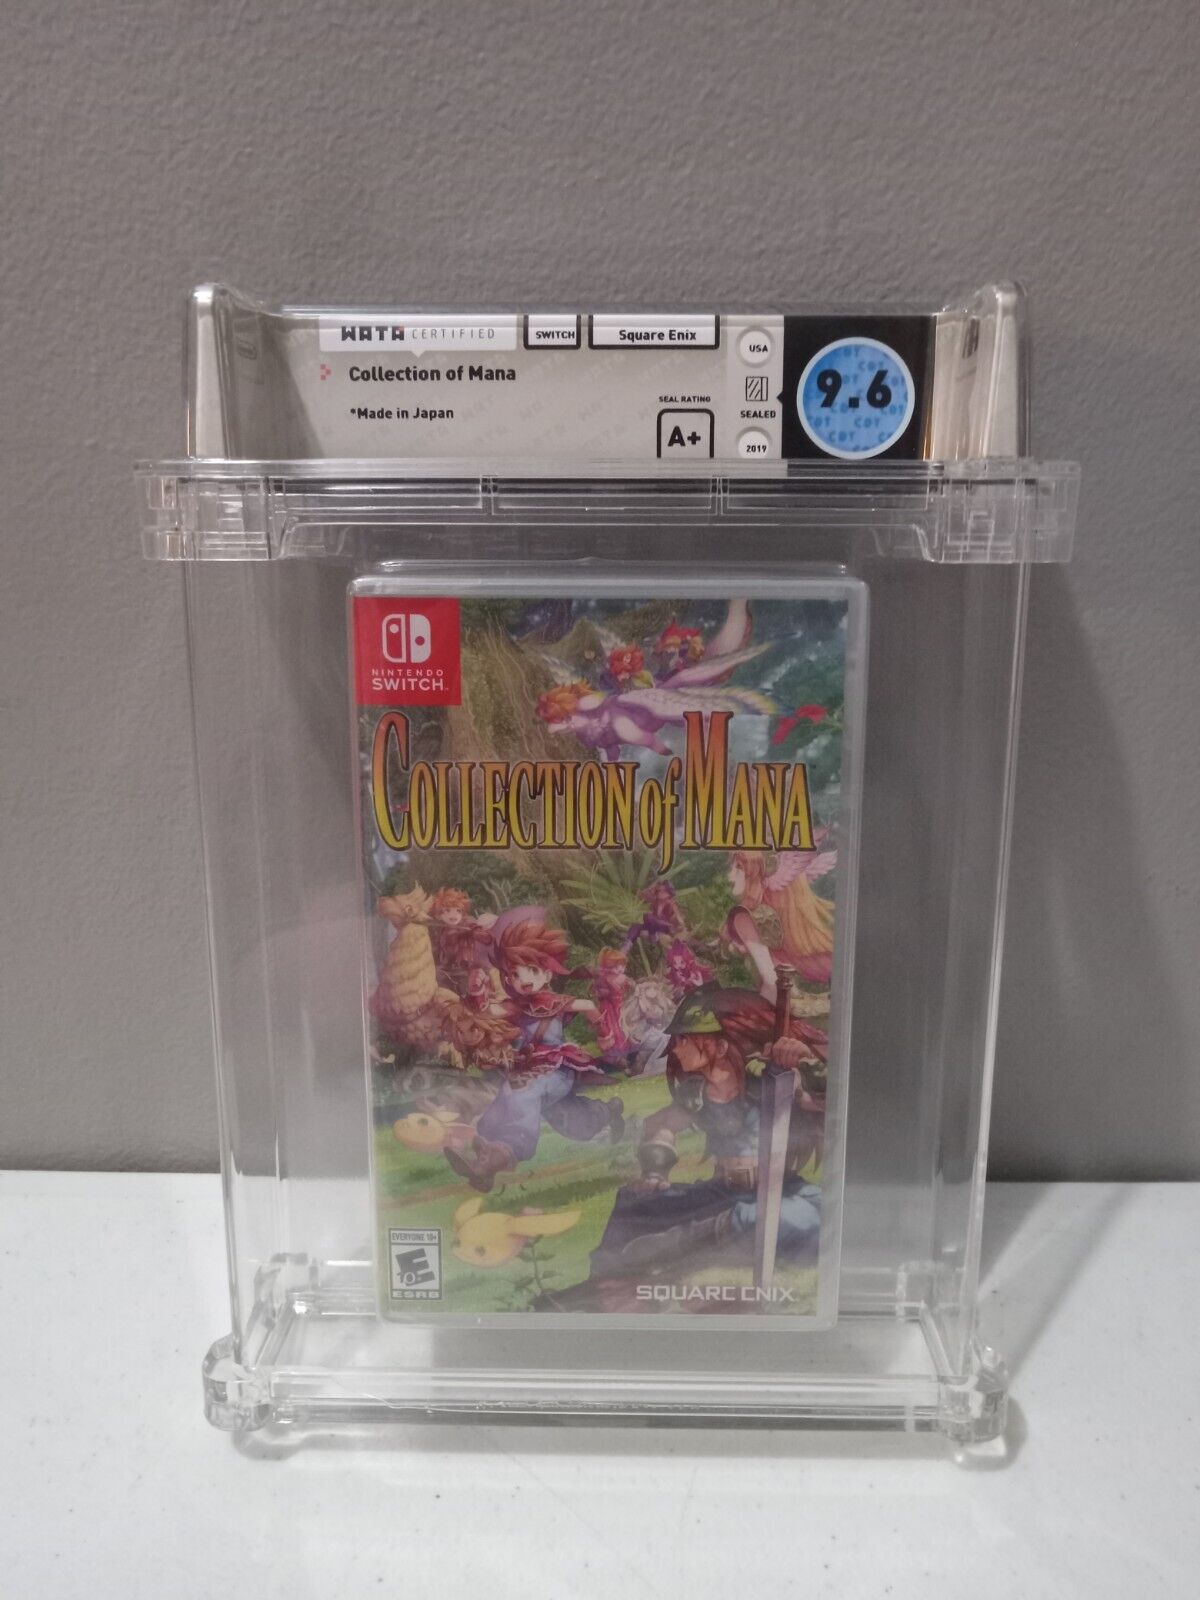 Nintendo Switch Collection Of Mana WATA Graded 9.6 A+ New Sealed